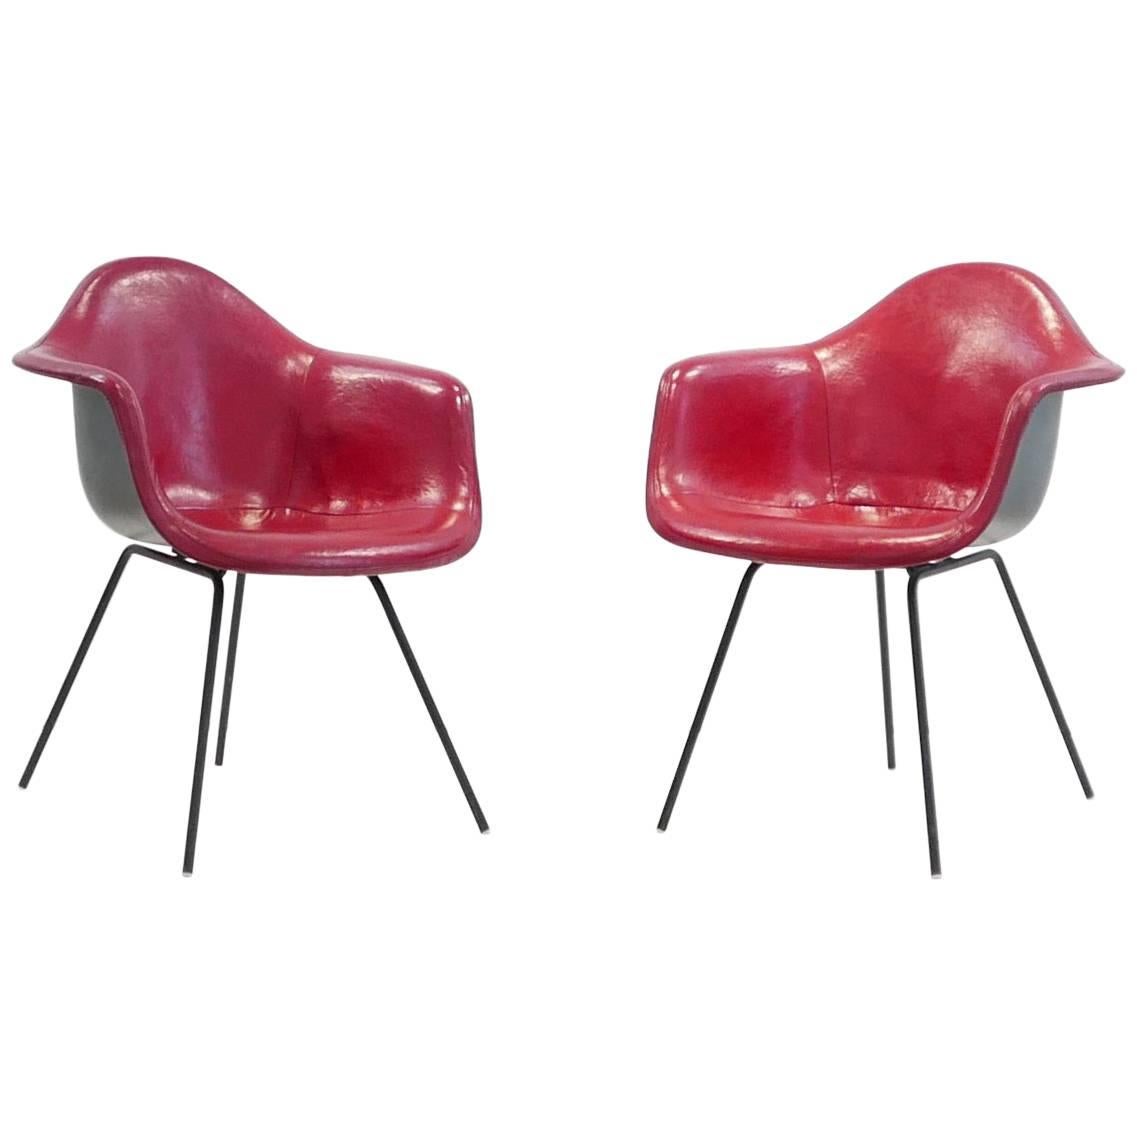 Charles and Ray Eames Pair of 'DAX' Chairs For Sale